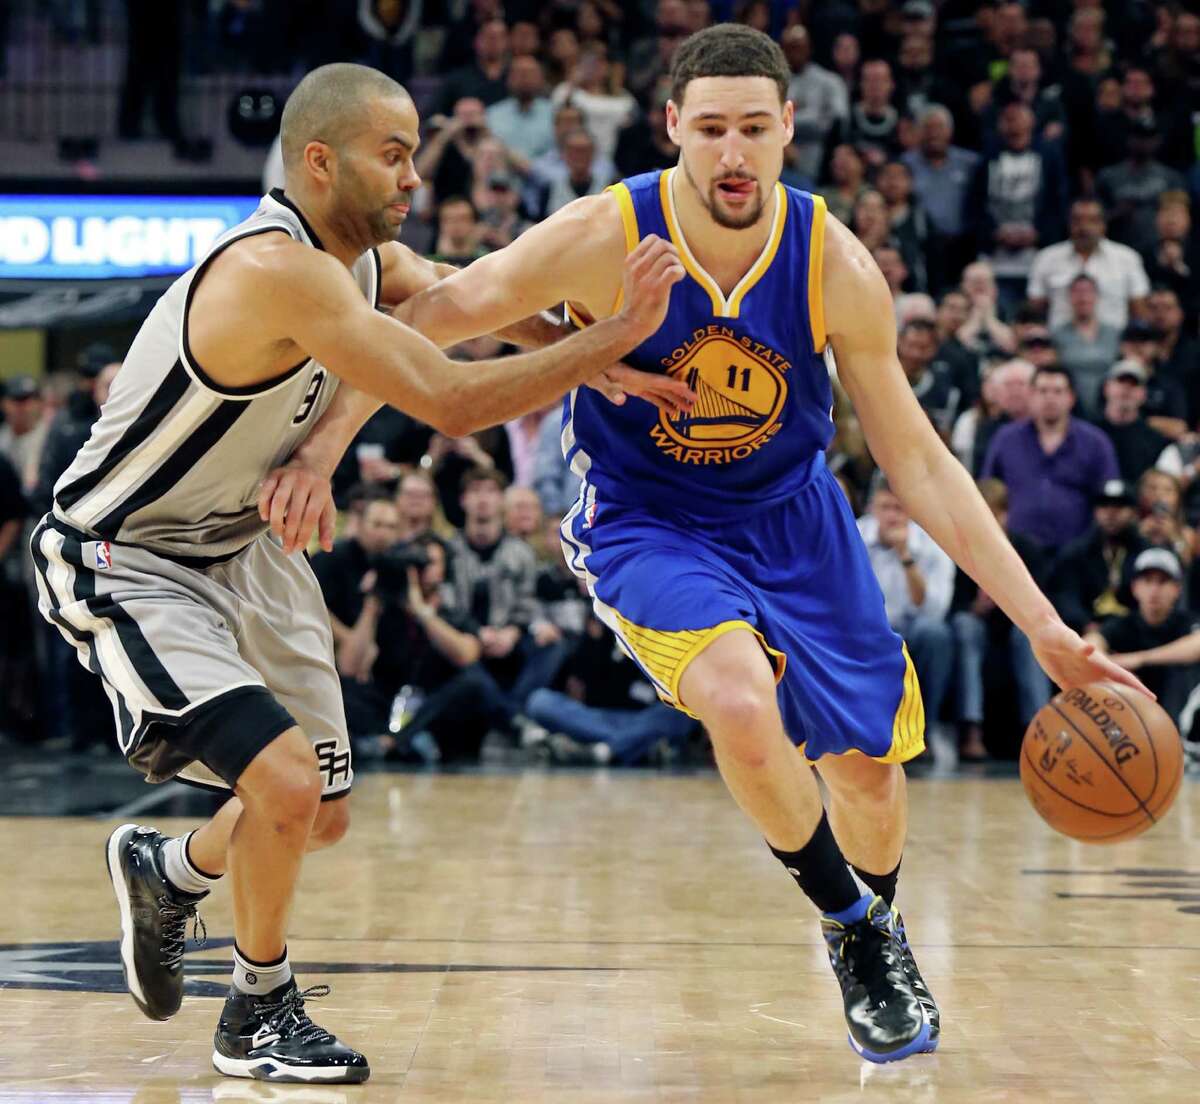 San Antonio Spurs' Tony Parker defends Golden State Warriors' Klay Thompson during second half action Saturday March 19, 2016 at the AT&T Center. The Spurs won 87-79.